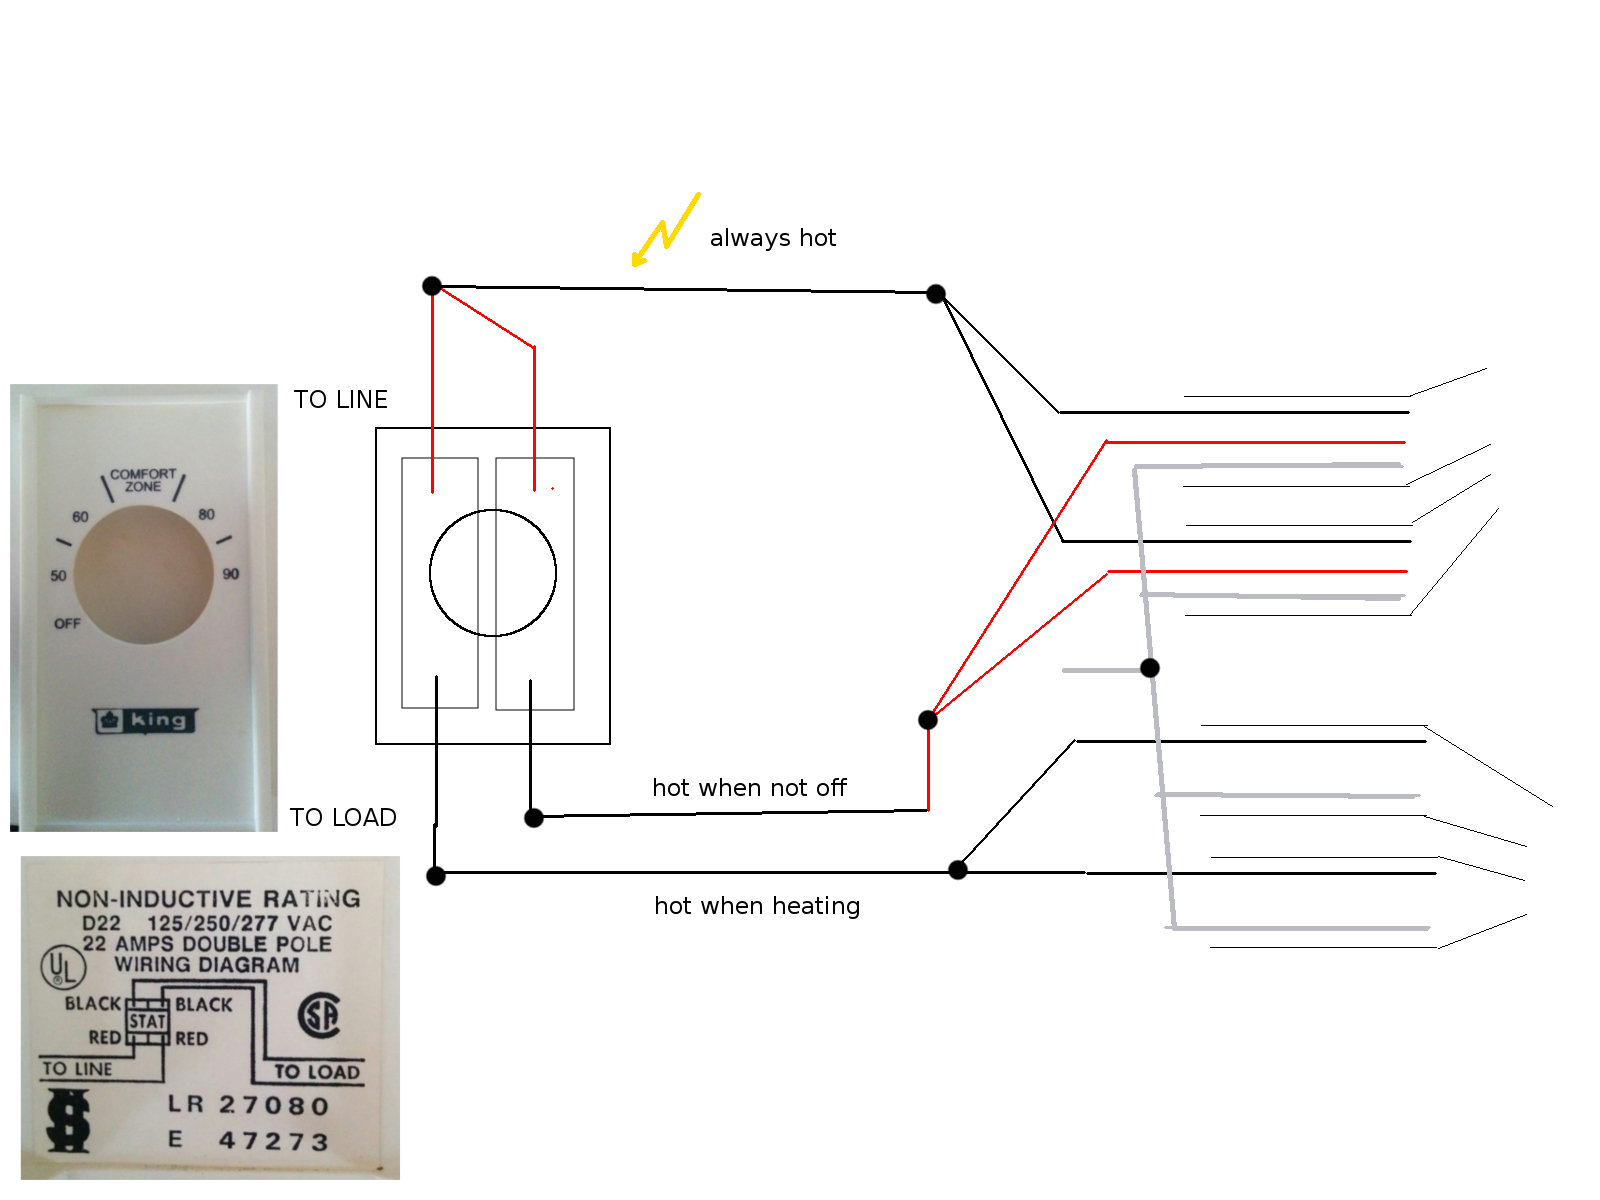 Honeywell Baseboard thermostat Wiring Diagram Stelpro N12v2 Electric Baseboard Heater Wiring Doityourselfcom